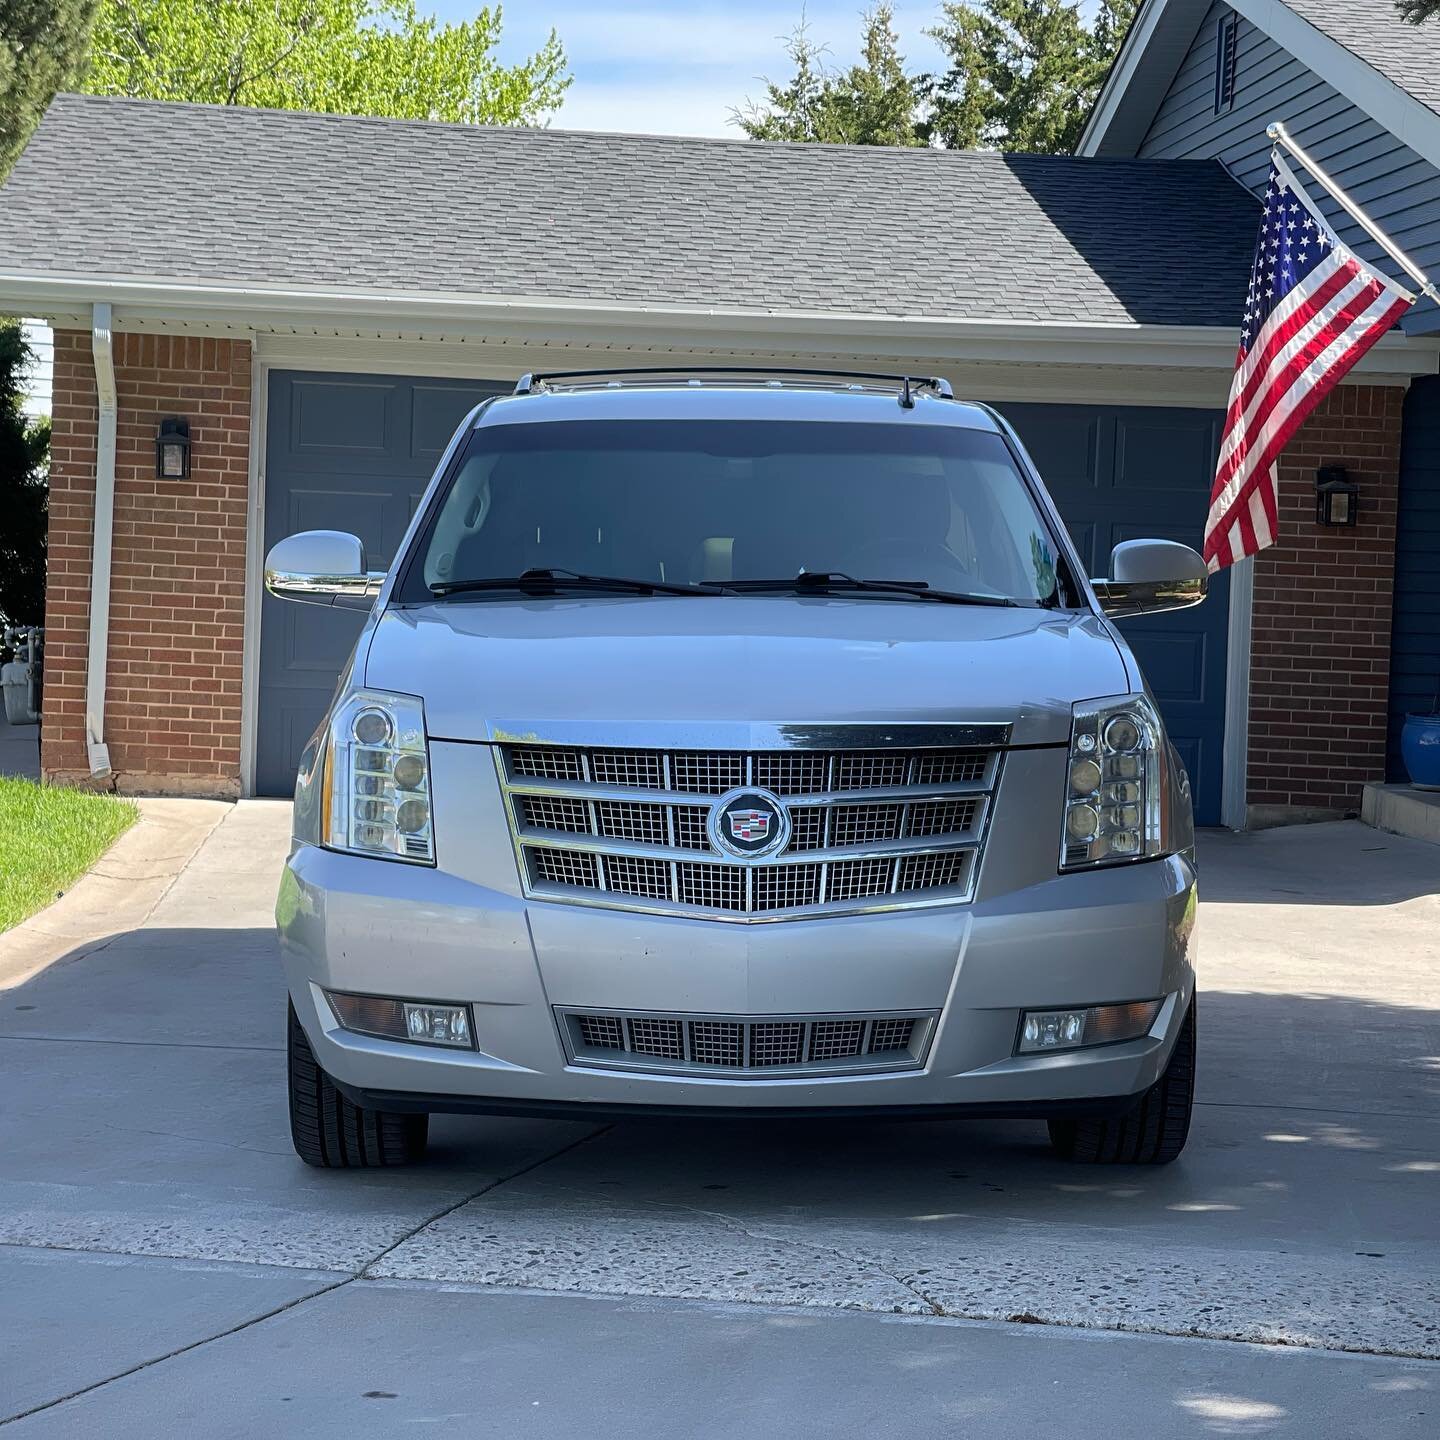 Pre-sale detail on this 13 year old Escalade!